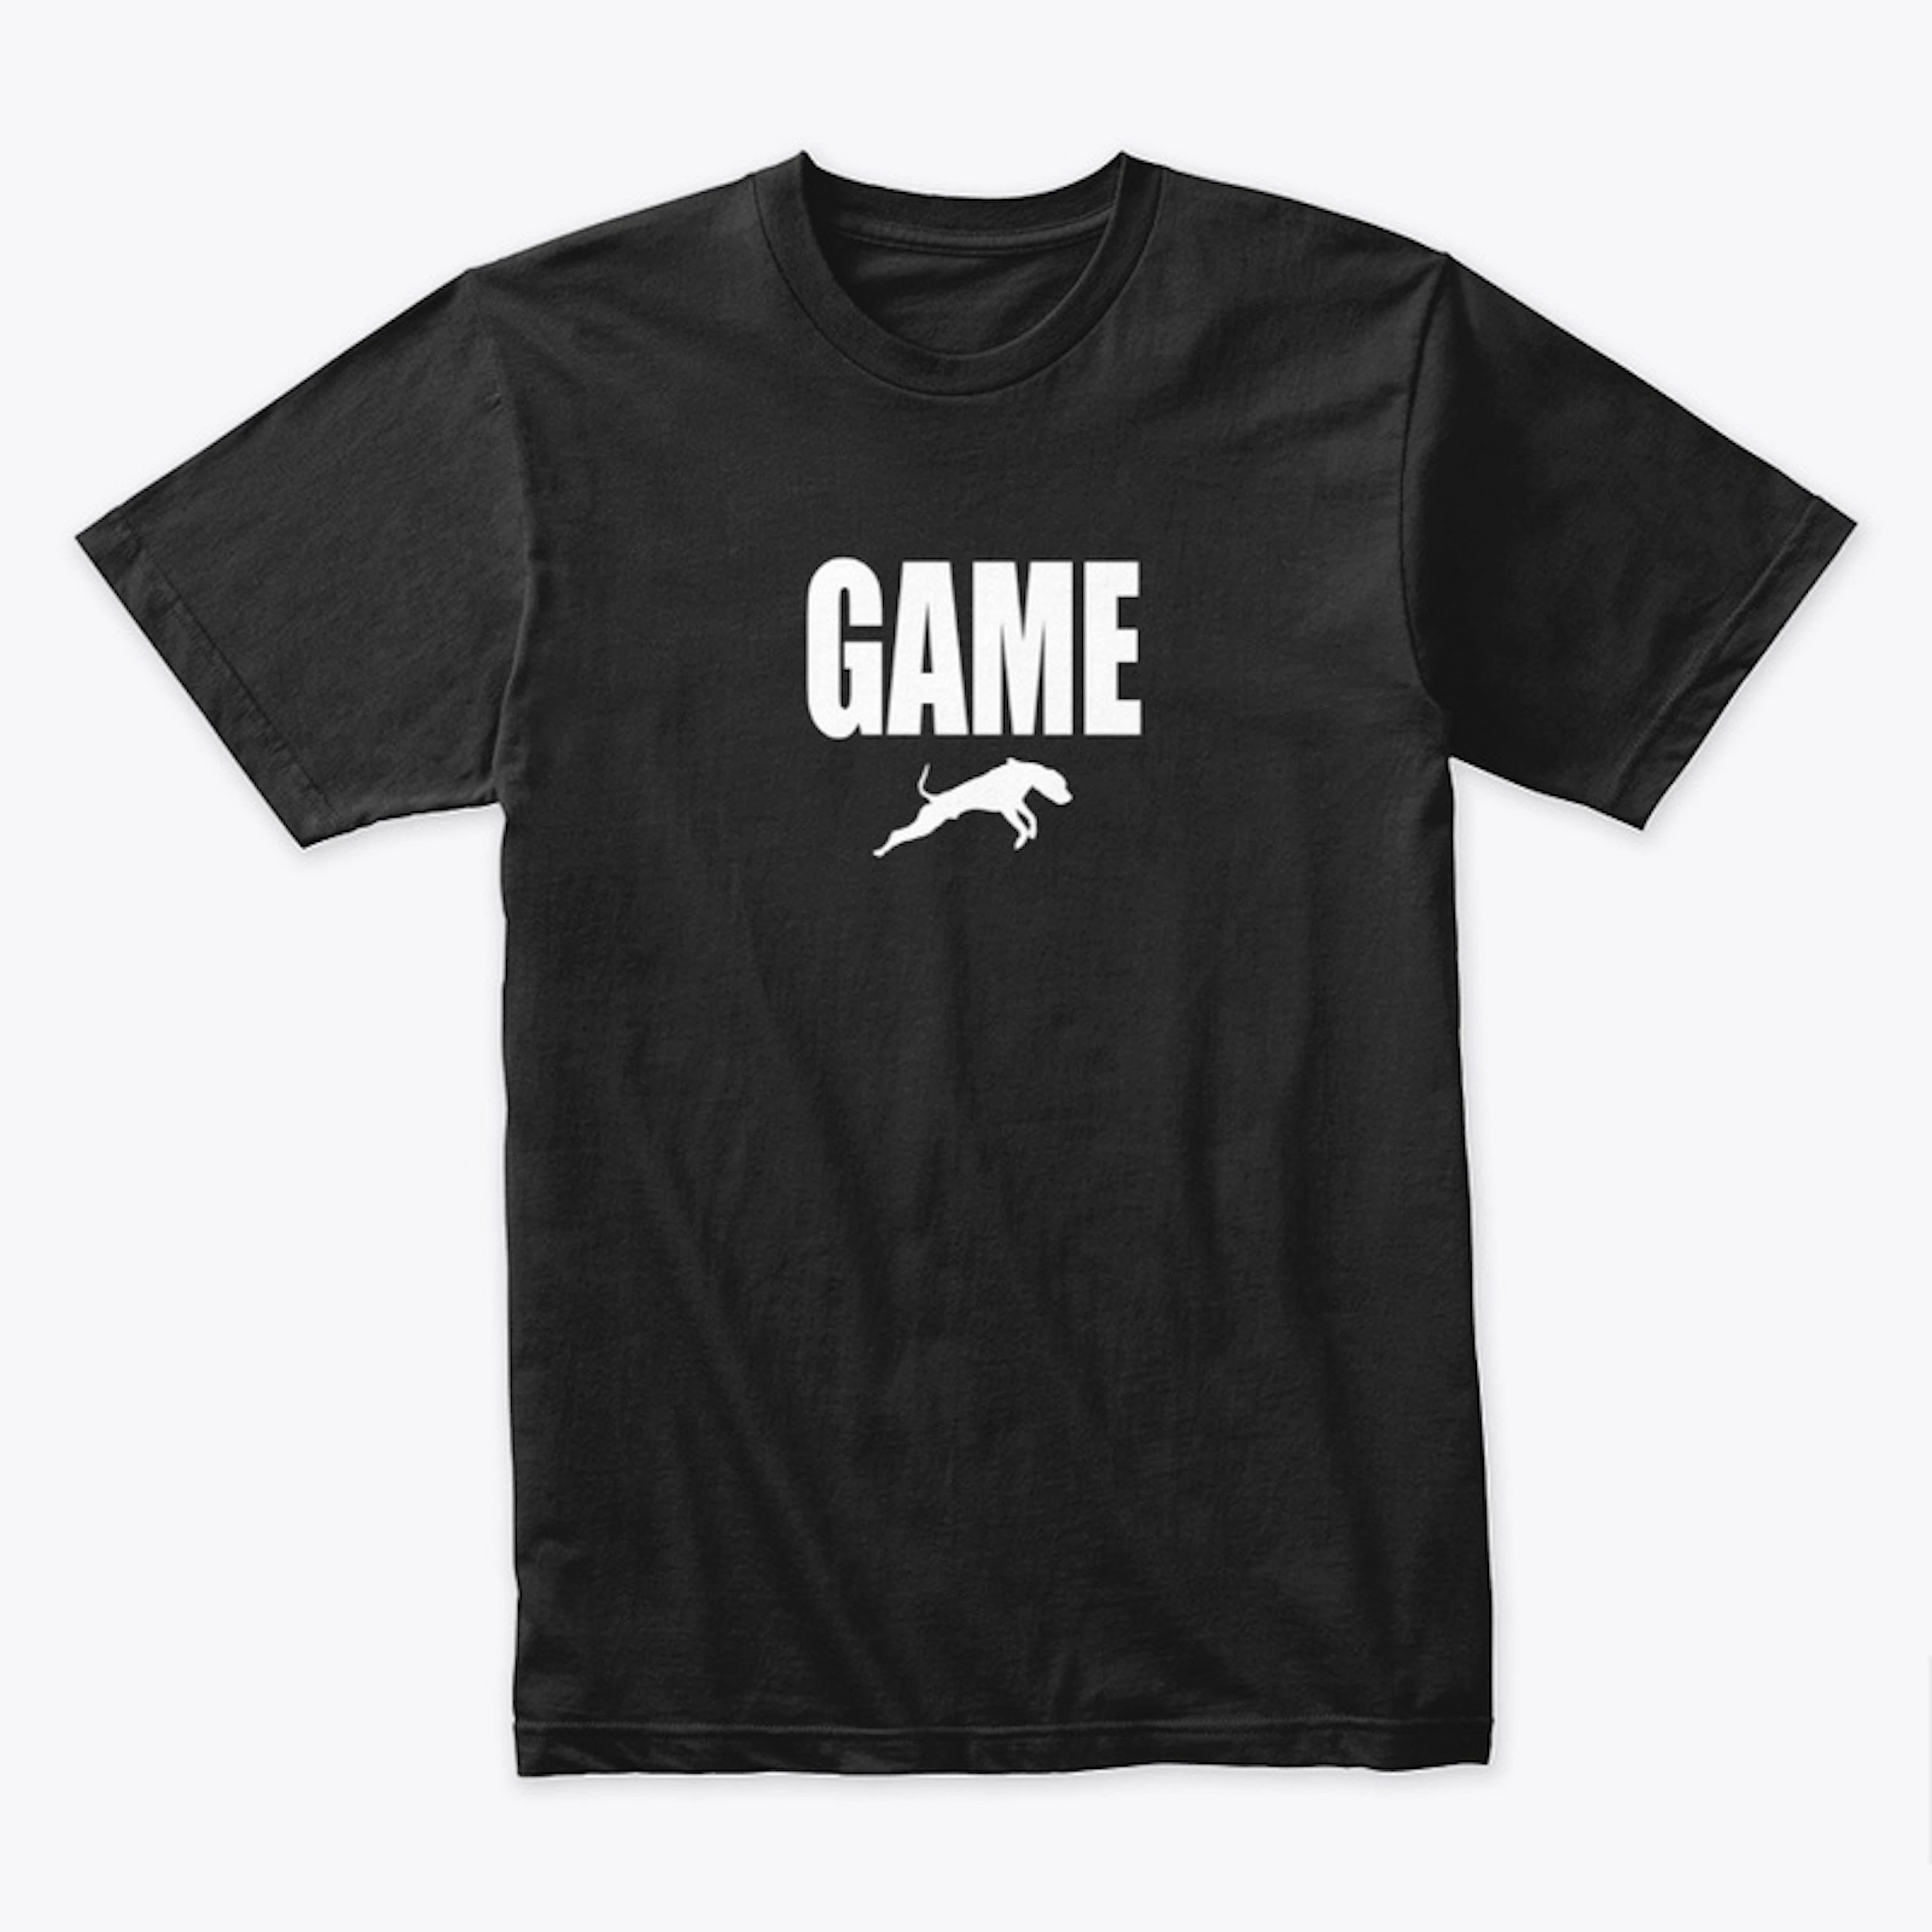 2022 GAME TEE FROM BBK9